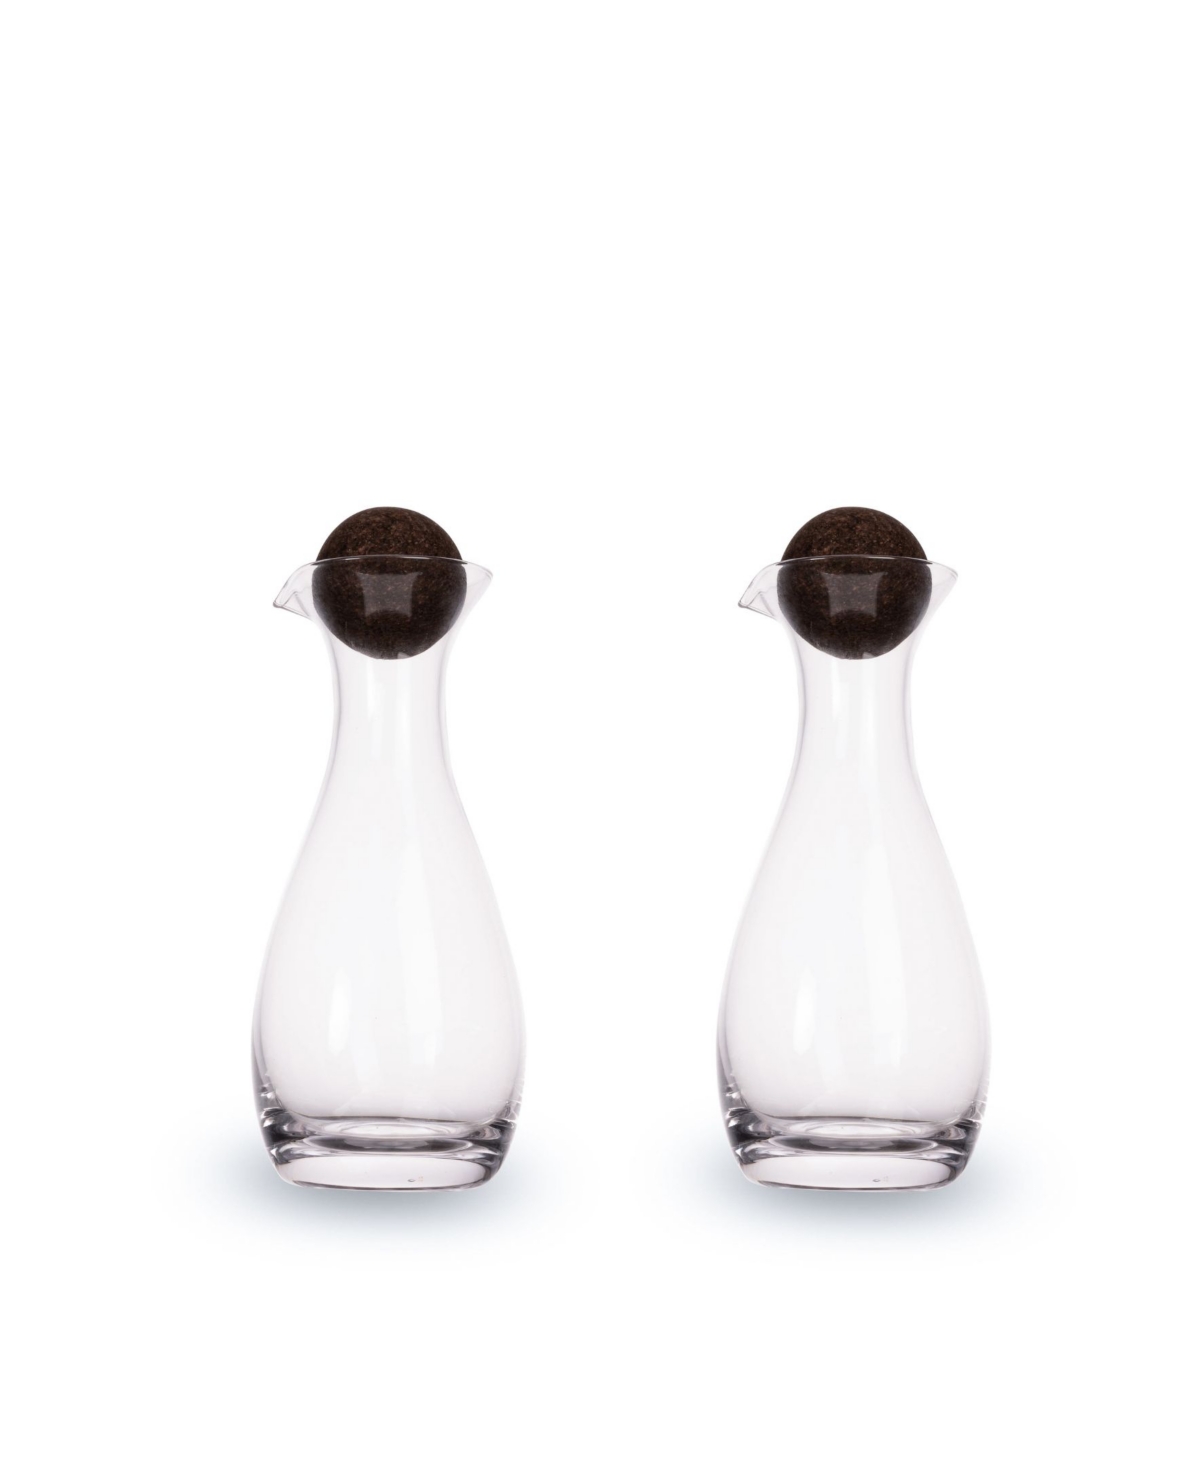 Sagaform Nature Oil And Vinegar Bottles With Cork Stoppers, Set Of 2 In White